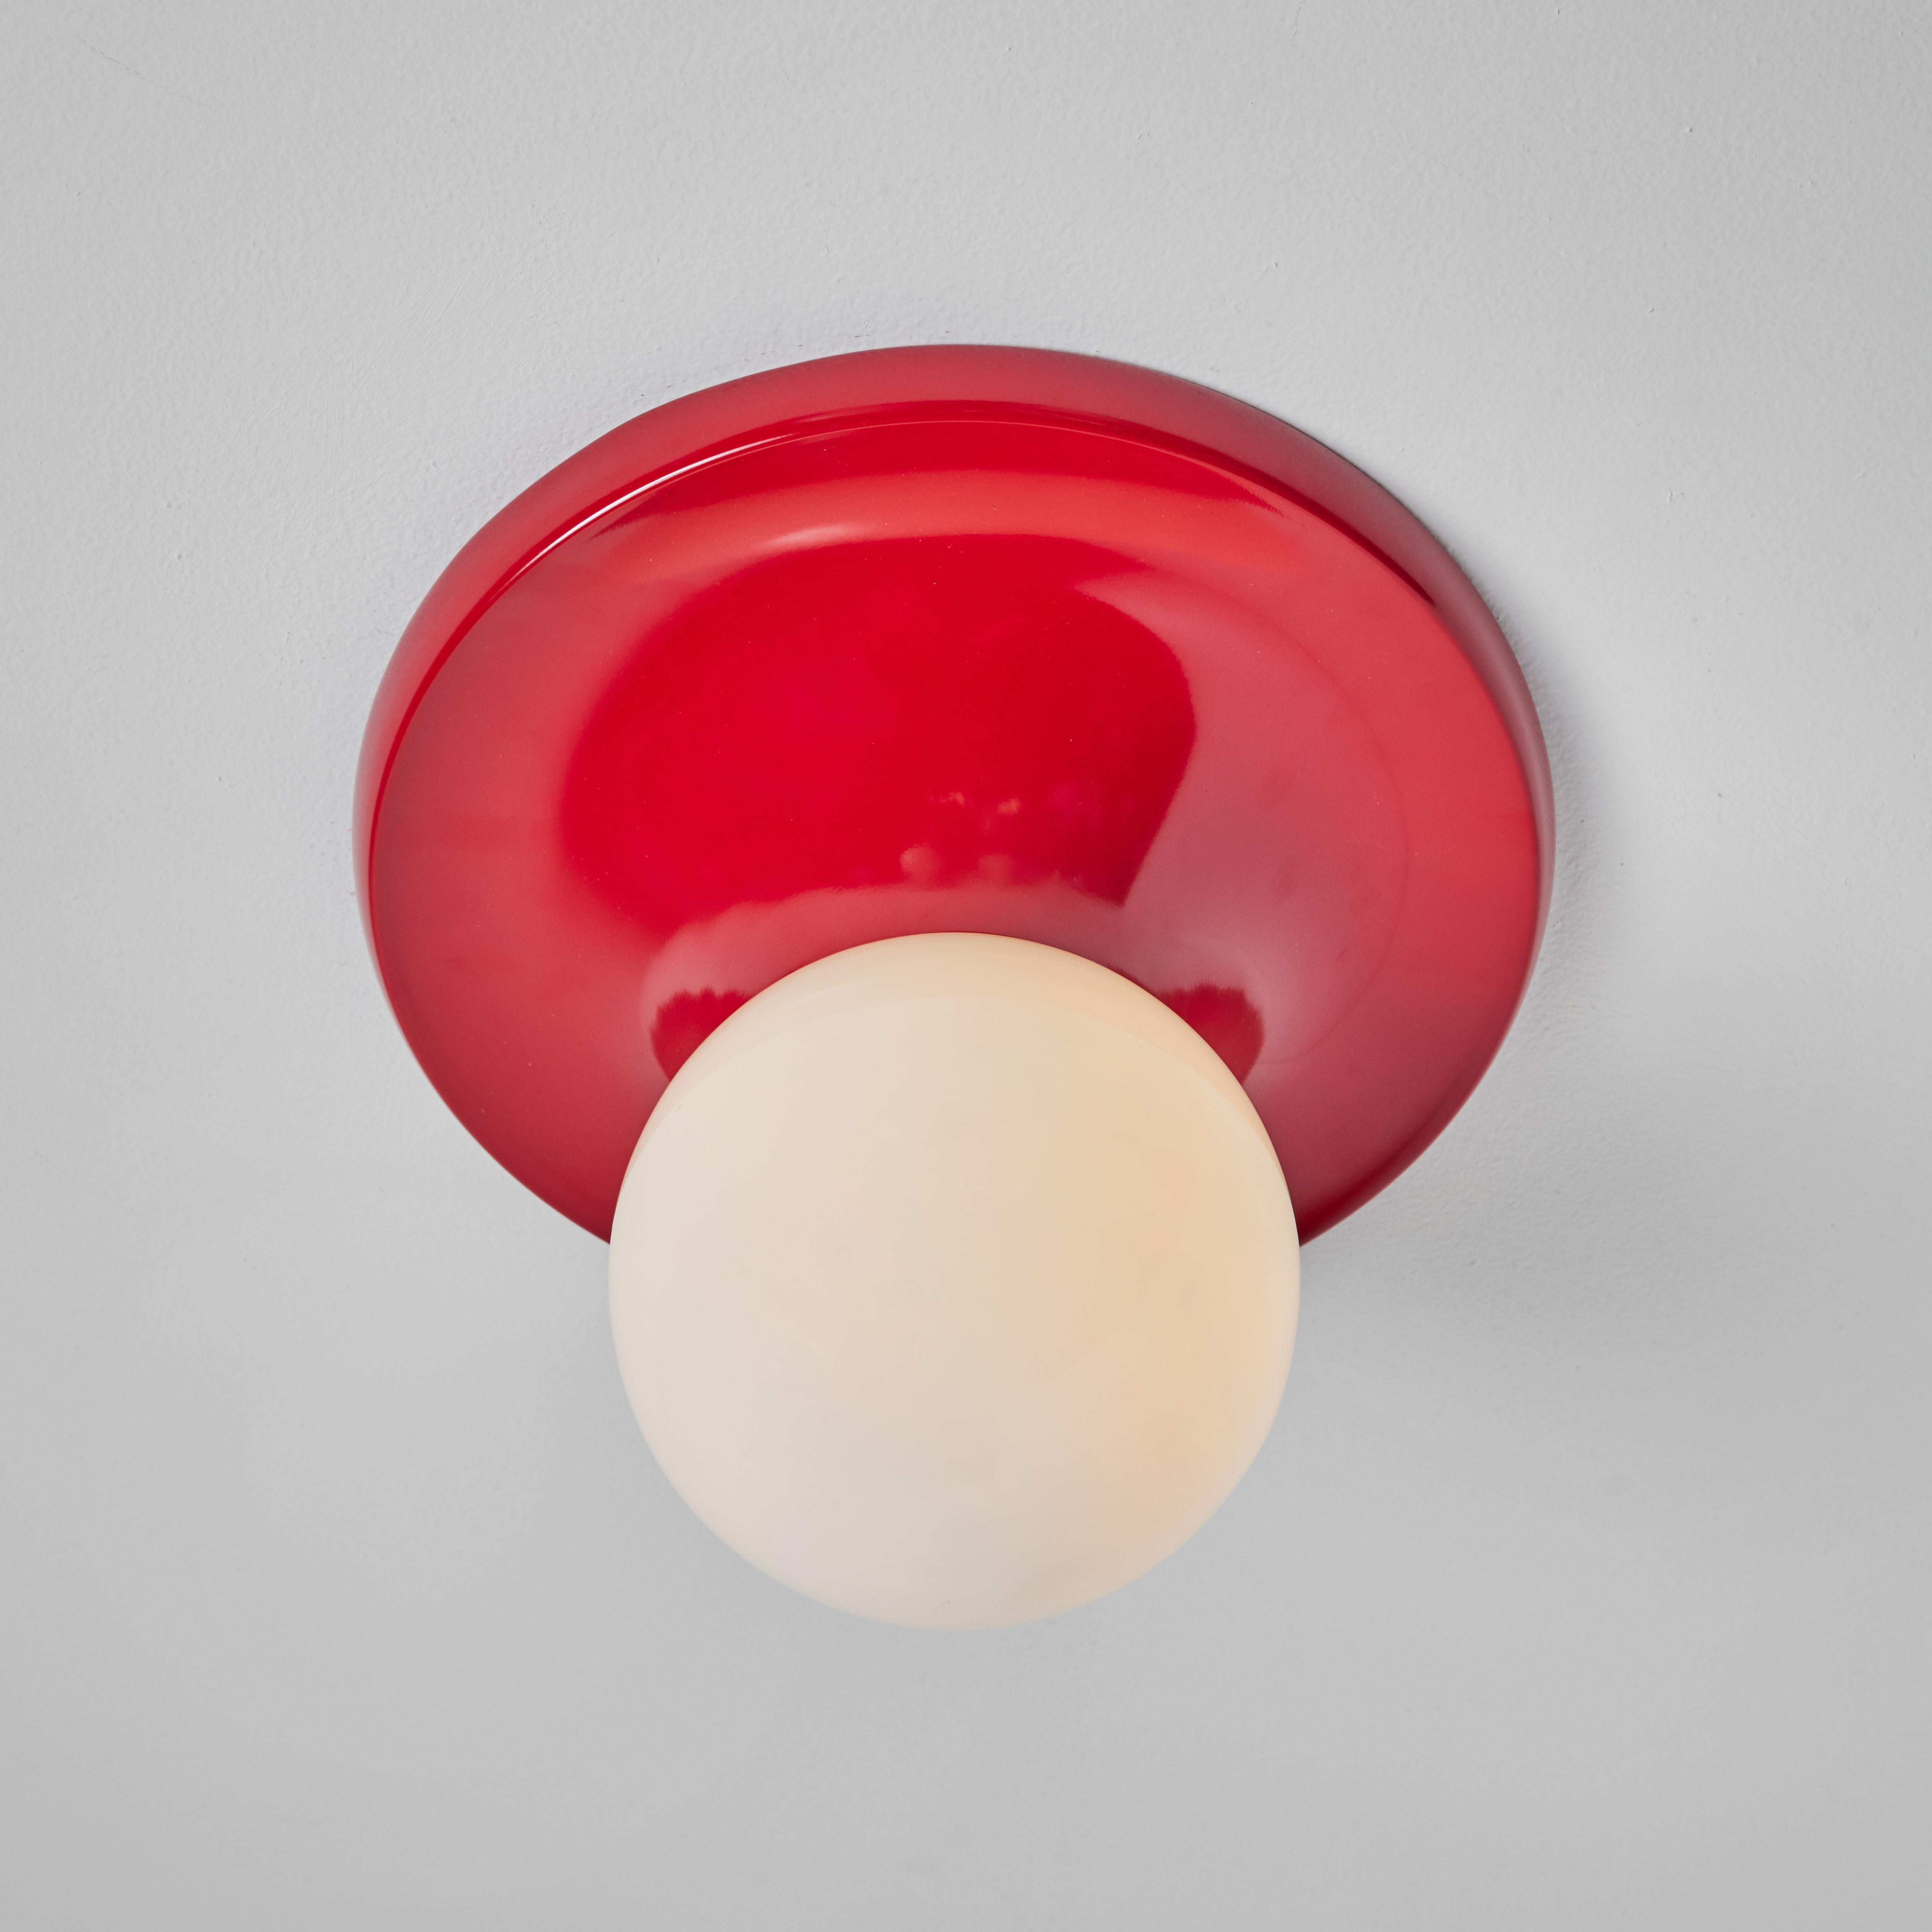 Mid-20th Century 1960s, Achille Castiglioni 'Light Ball' Wall or Ceiling Lamp in Red for Flos